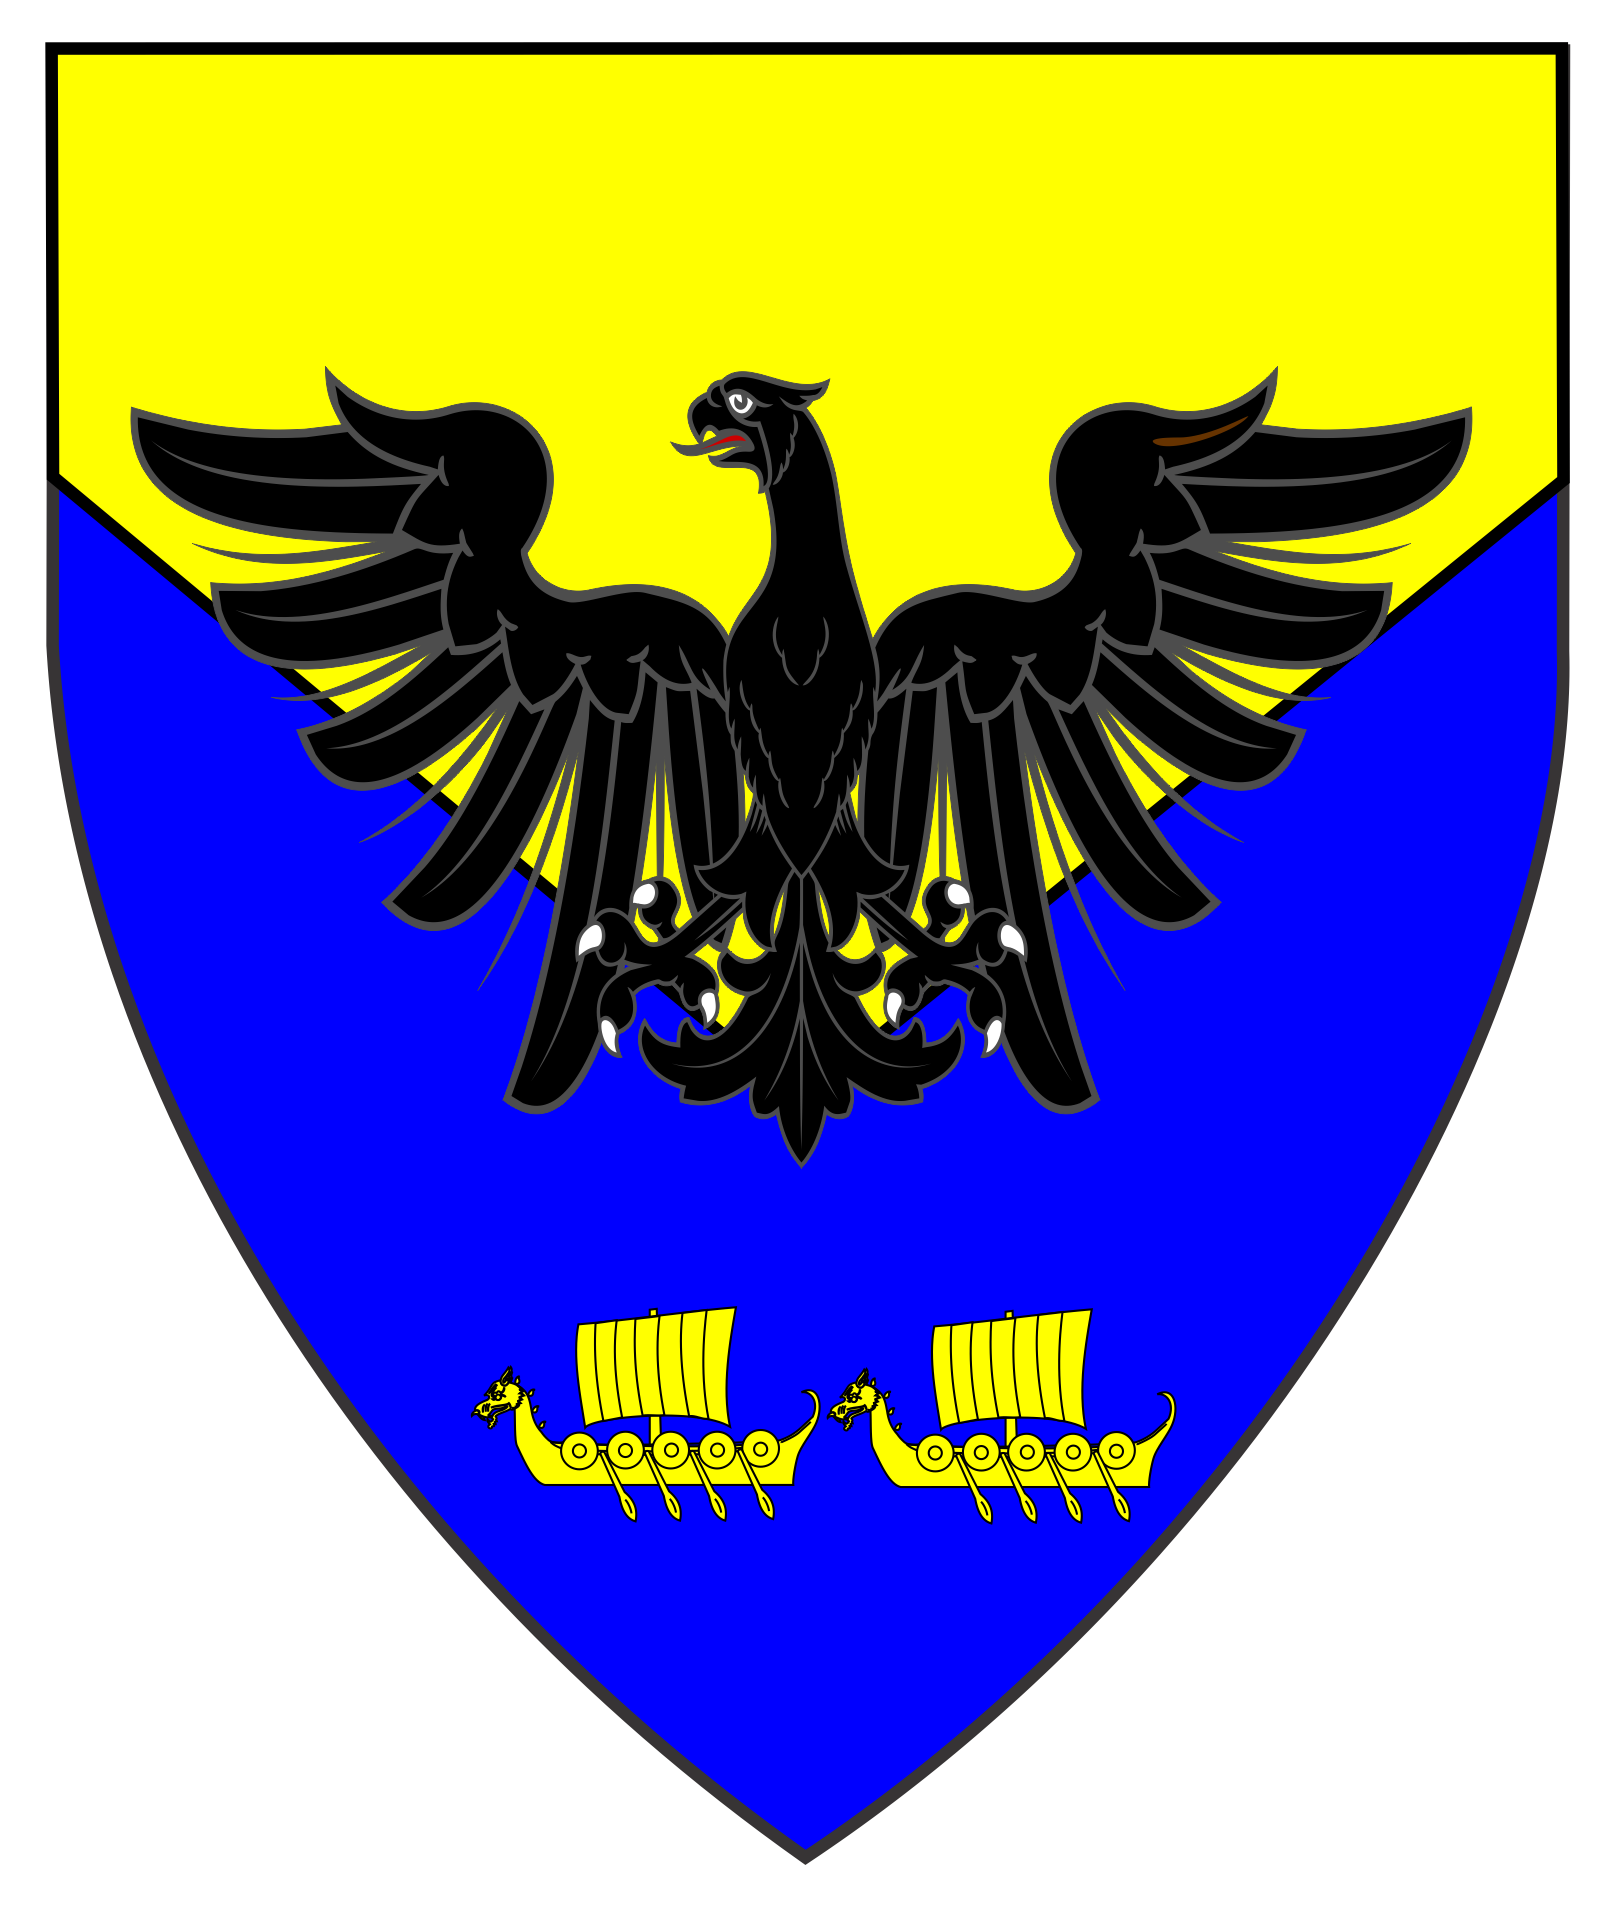 Per chevron inverted Or and azure, an eagle sable, in base two drakkars Or.